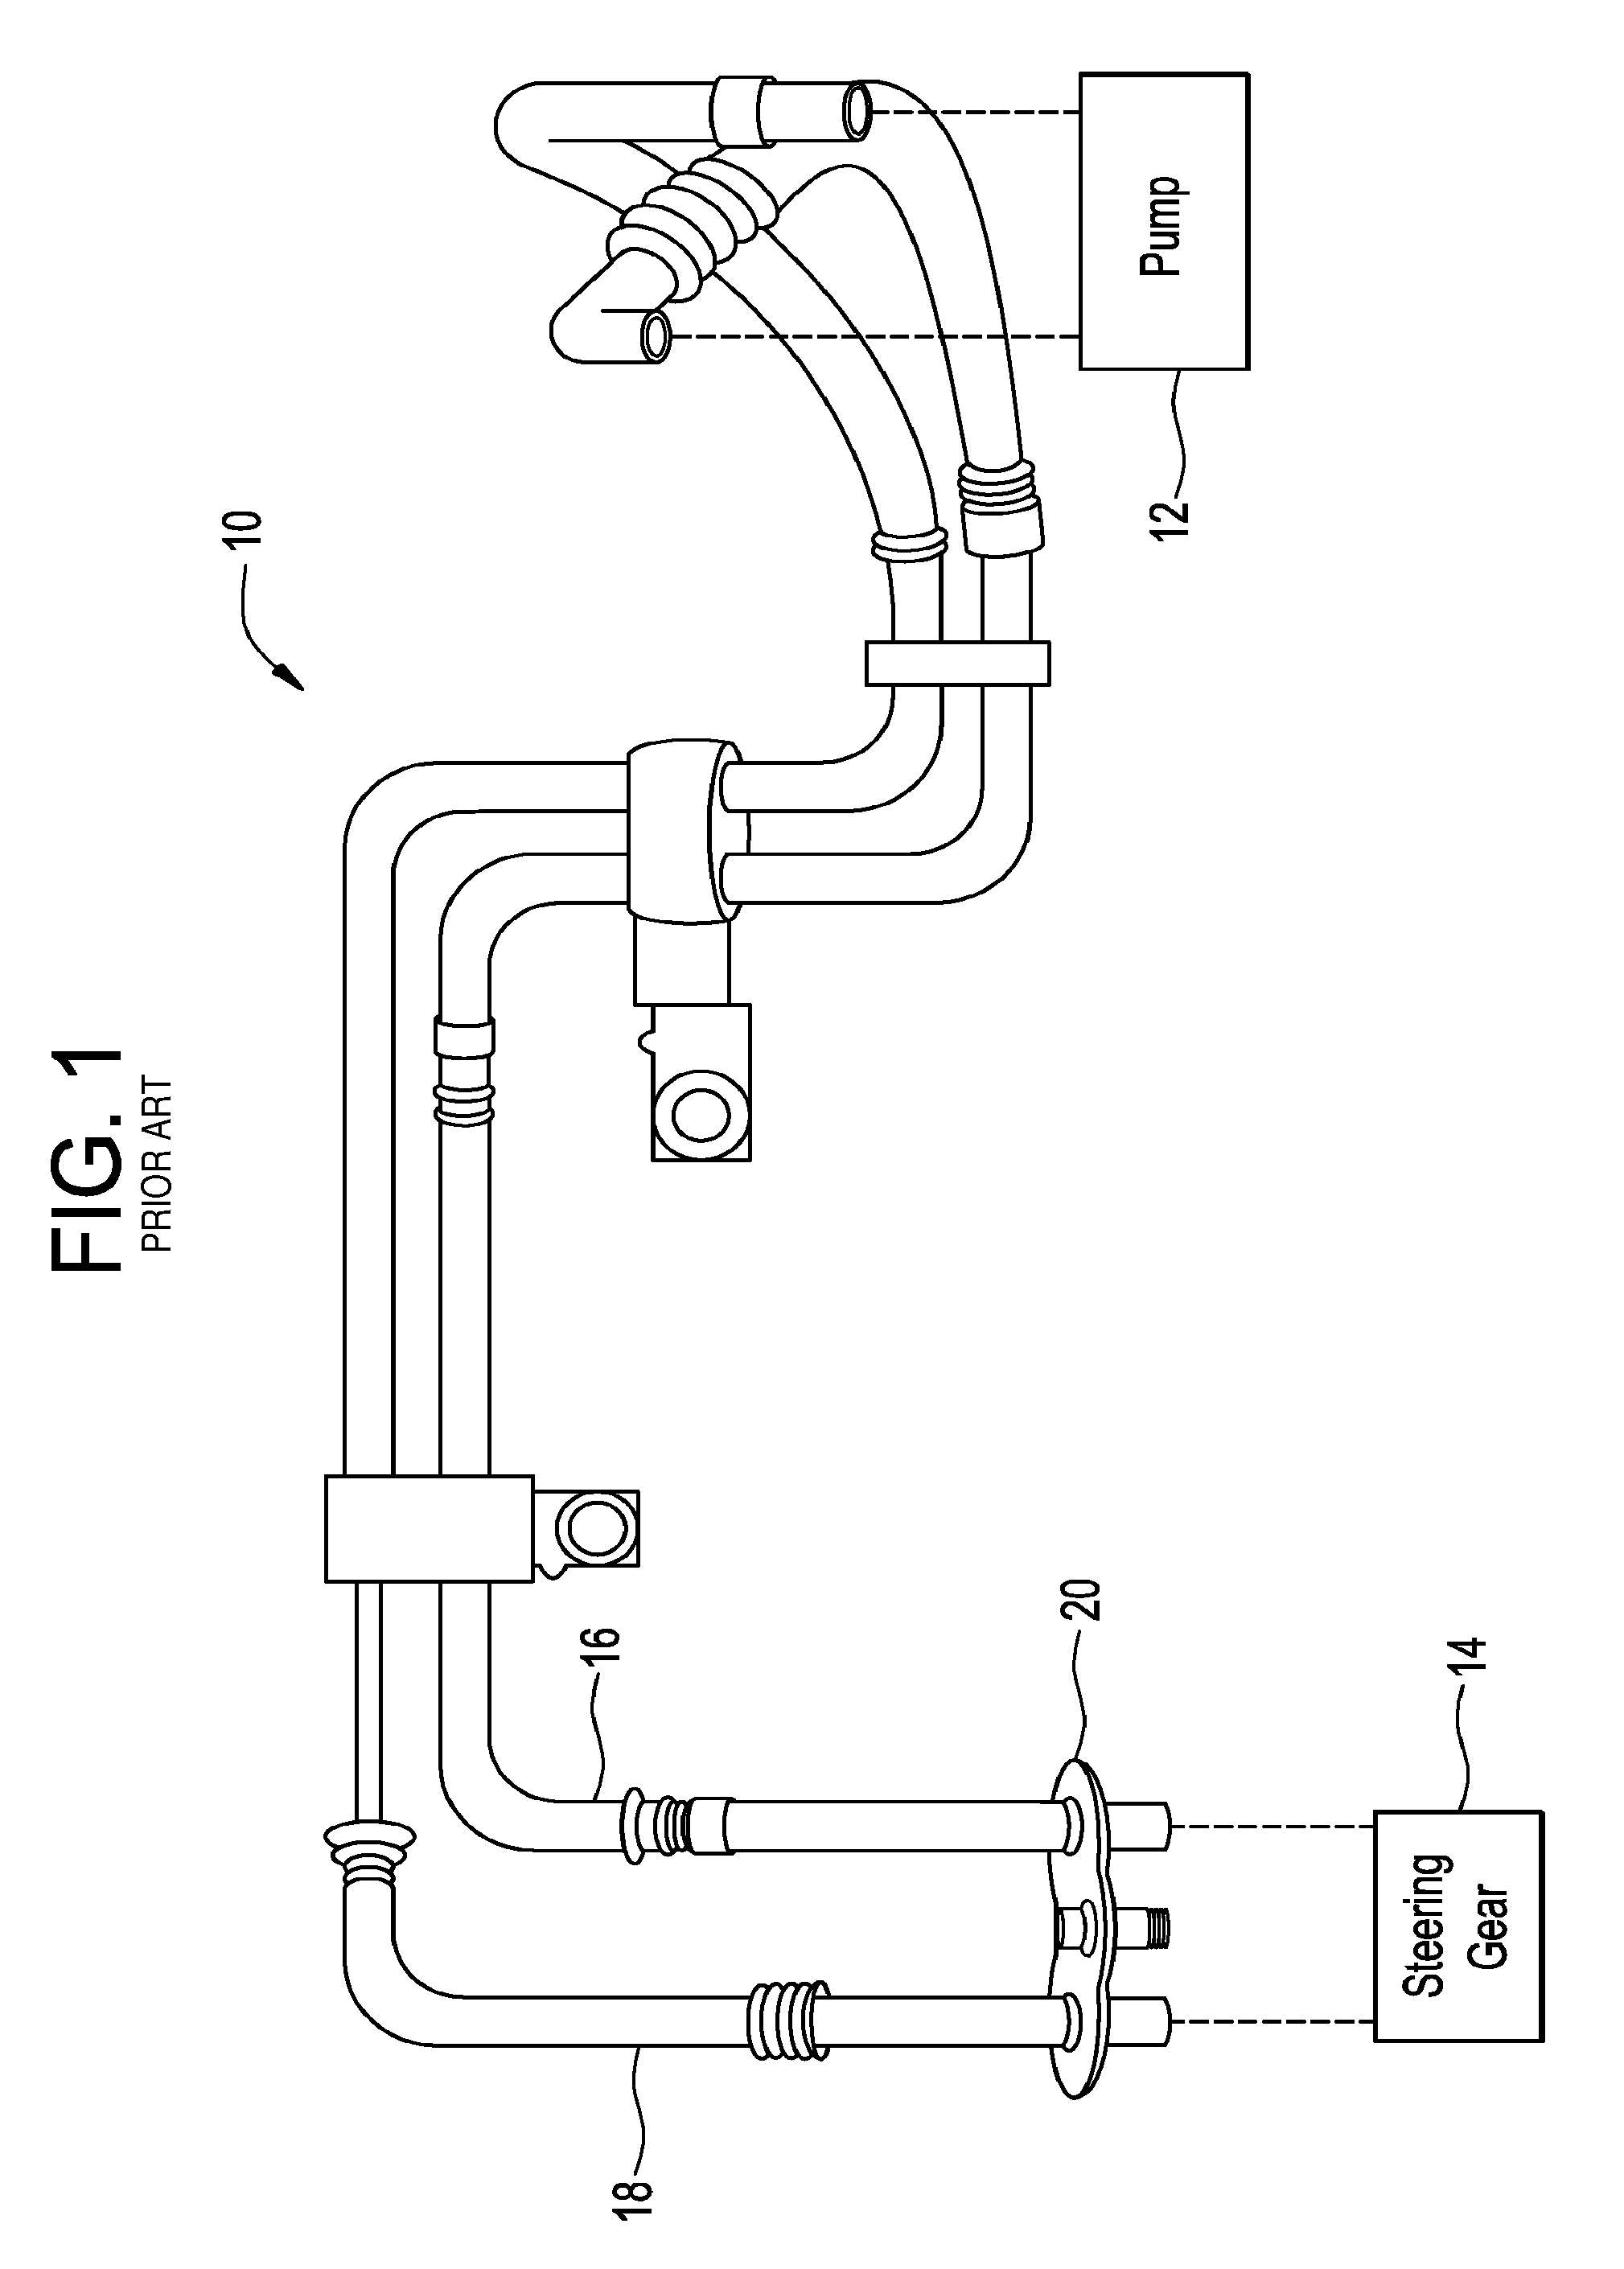 Method of determining the robustness of endformed tubular assembly and predicting the performance of such assembly in high pressure applications